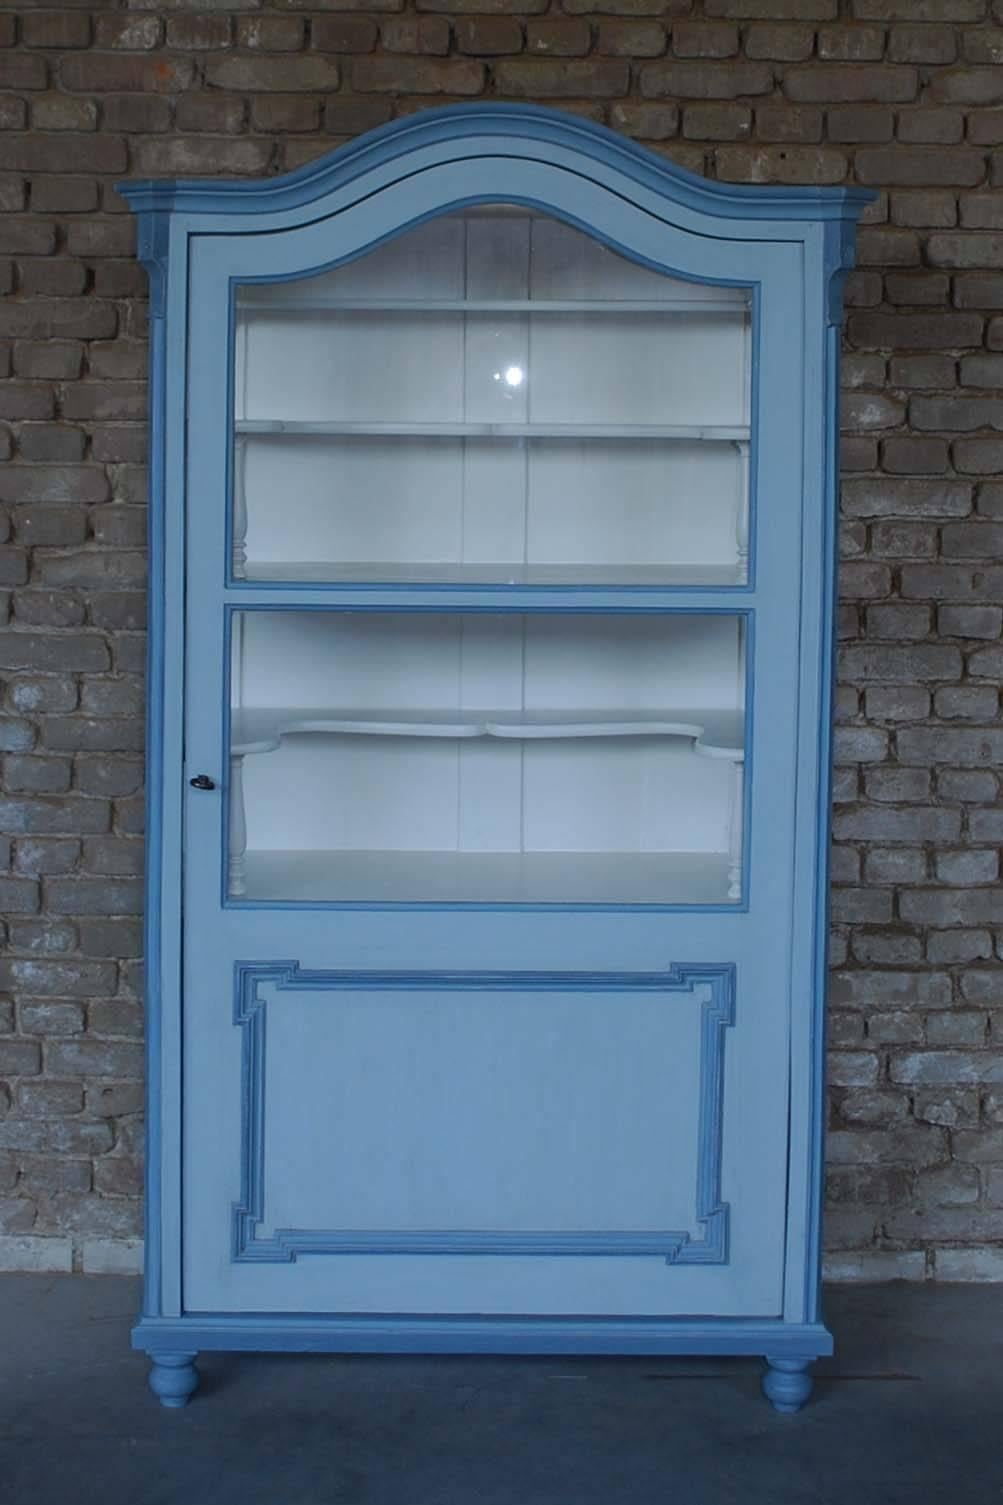 19th century French display cabinet or armoire in the Louis XV style.
This is an original display cabinet that is made in solid pine and veneer.
It has carefully been restored and painted in a light grey base color with blue highlights.
It has